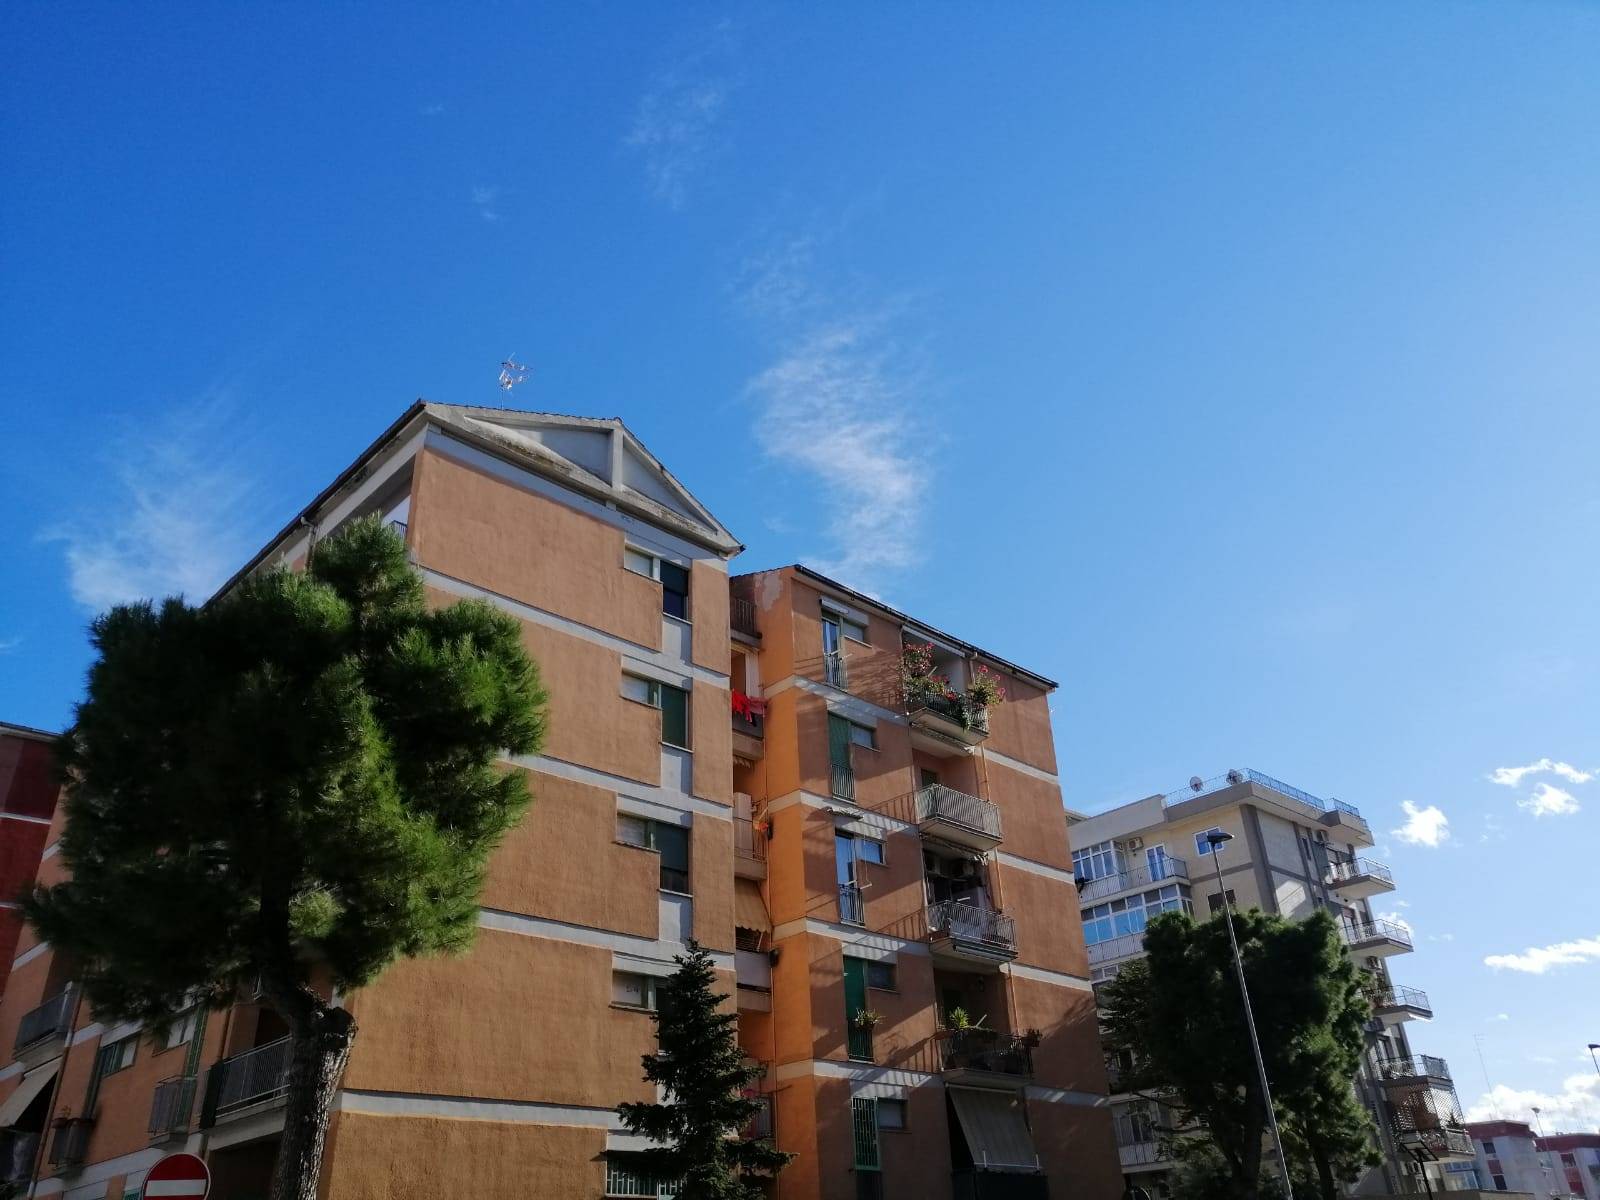 POGGIOFRANCO, BARI, Apartment for sale of 110 Sq. mt., Be restored, Heating Individual heating system, Energetic class: G, Epi: 165 kwh/m2 year, placed at Raised on 4, composed by: 4 Rooms, , 3 